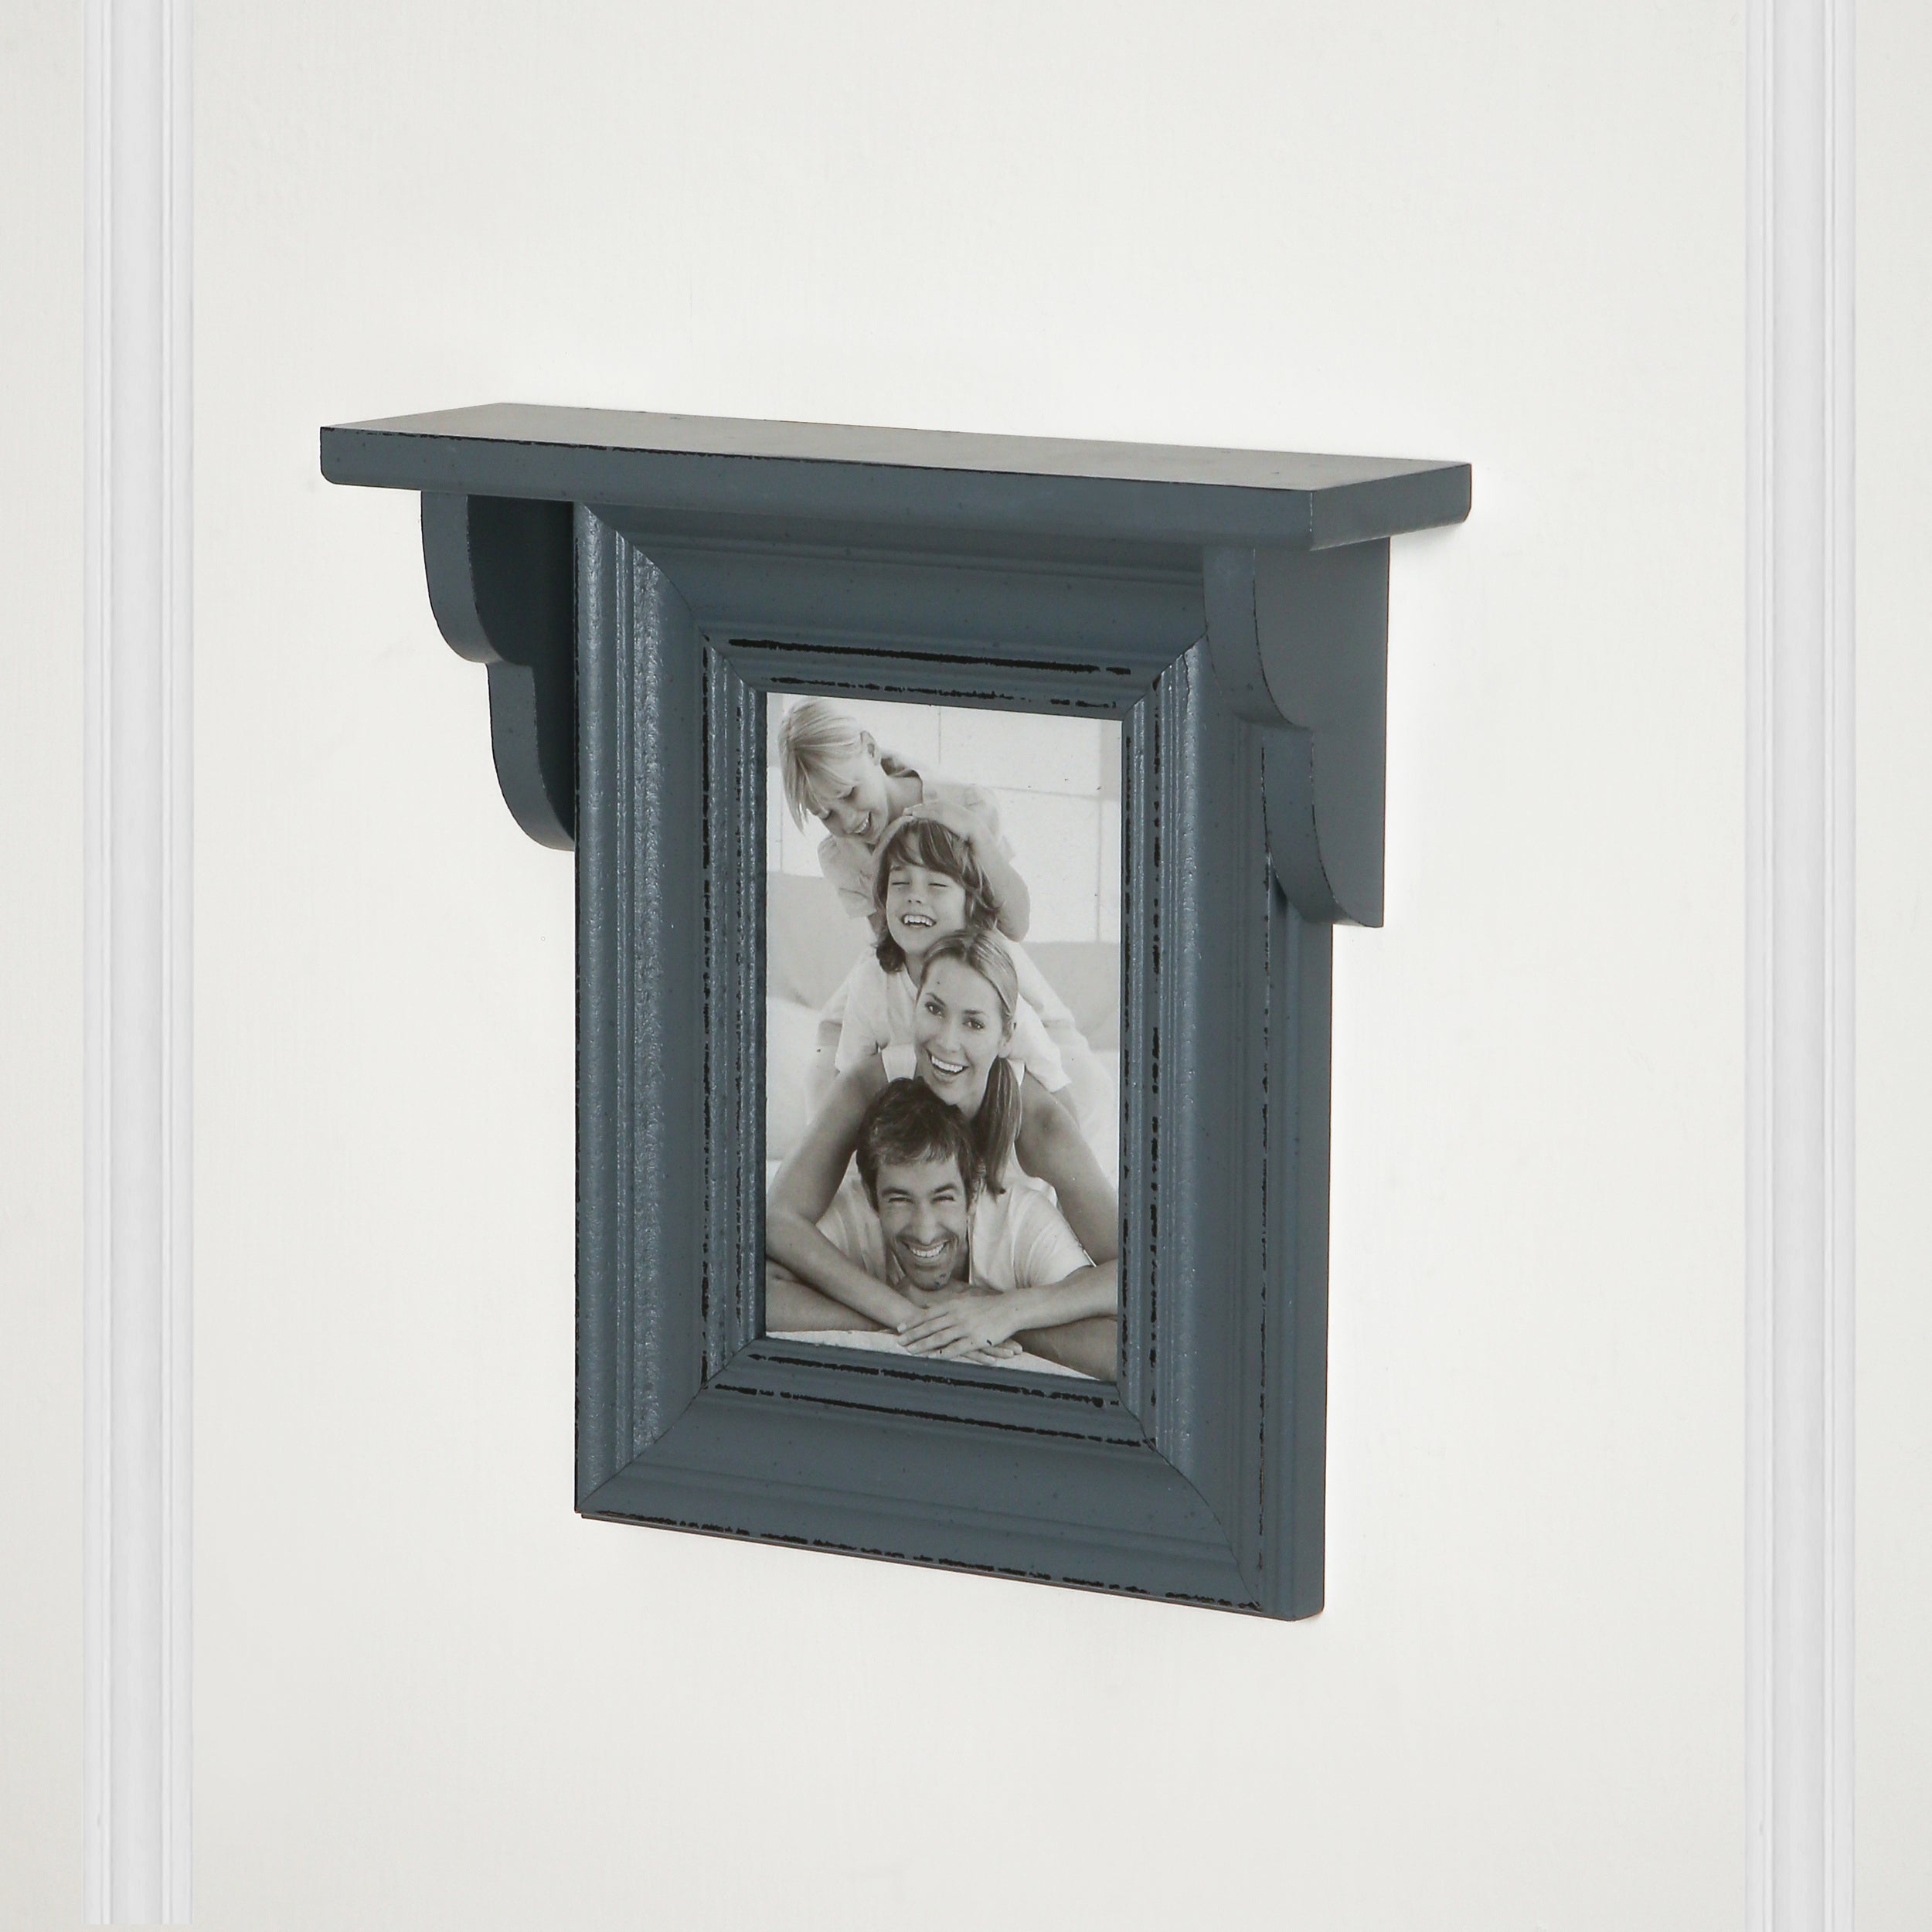 Photoframe with wooden shelf